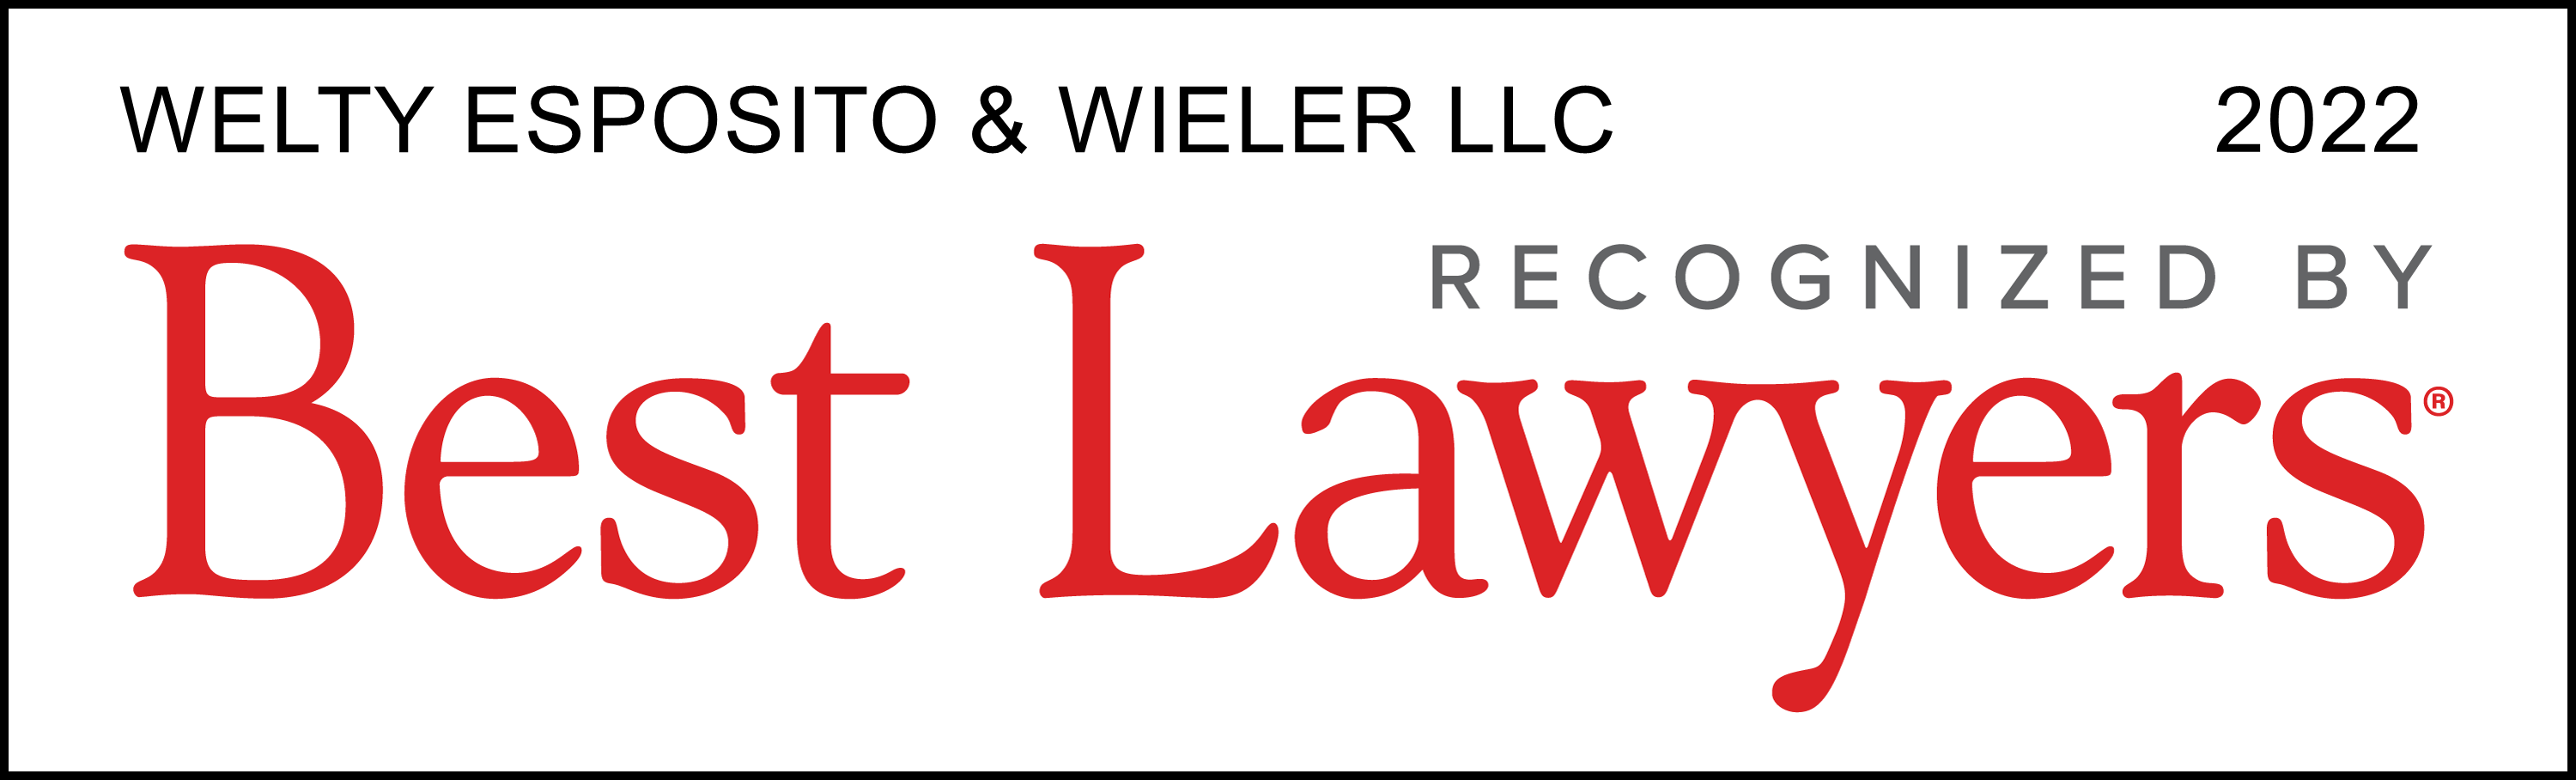 Welty Esposito & Wieler LLC | Recognized by Best Lawyers | 2022